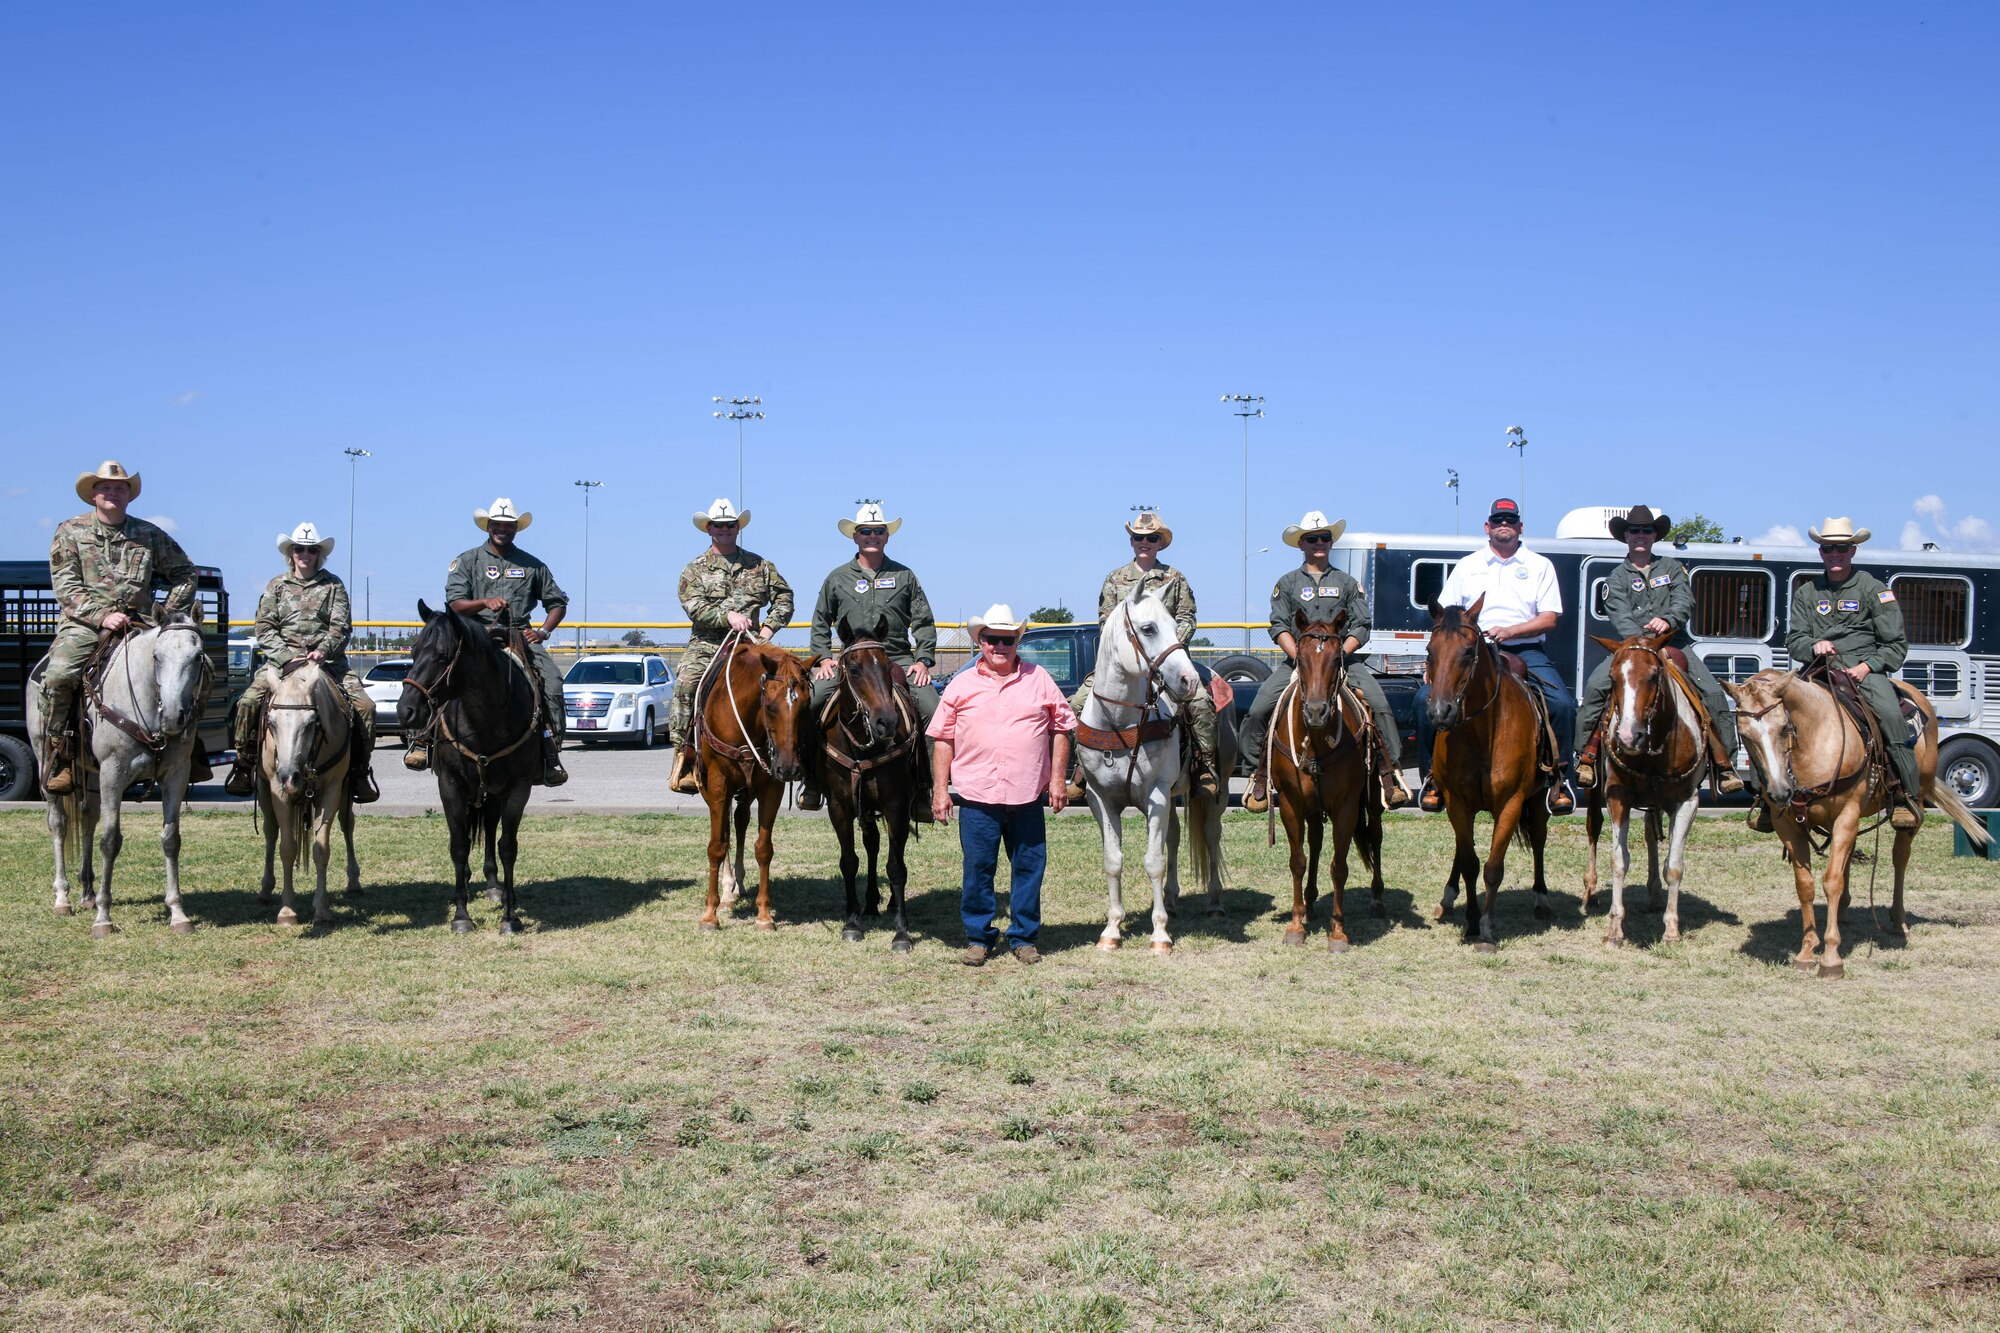 Gary “Bull” Watkins, a friend of Altus since 2011 and rancher (center), poses with the 97th Air Mobility Wing command team, as well as group commanders and senior enlisted leaders (SEL), at the 23rd Annual Cattle Drive at Altus Air Force Base, Oklahoma, Aug. 25, 2022. Watkins has enabled each cattle drive, where he fits each commander and SEL to their horses. (U.S. Air Force photo by Senior Airman Trenton Jancze)